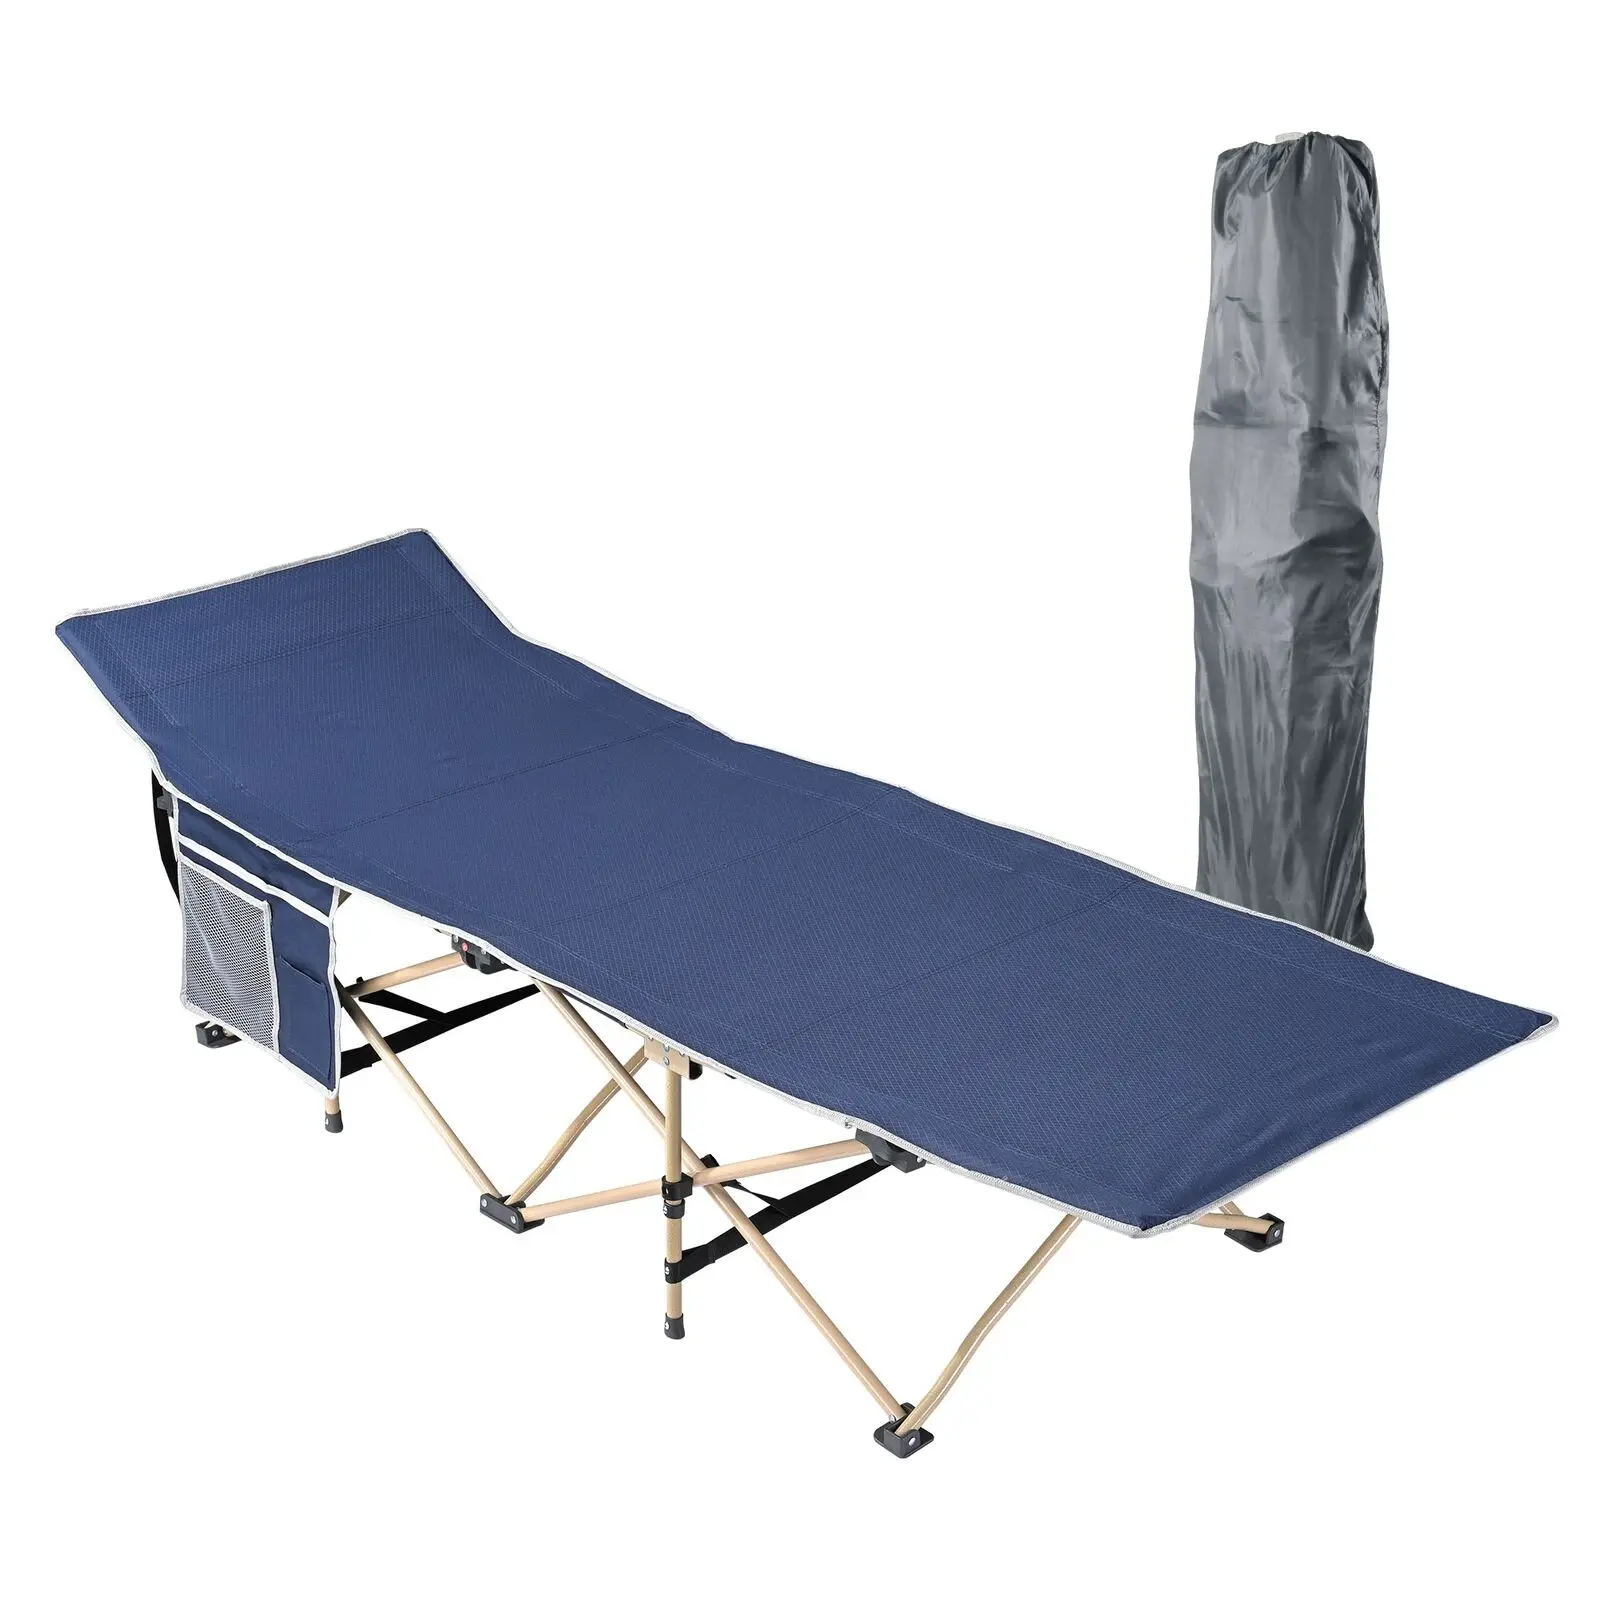 

75 X27 X14 X-shape Structure Frame Folding Camping Cot Portable Cot Blue